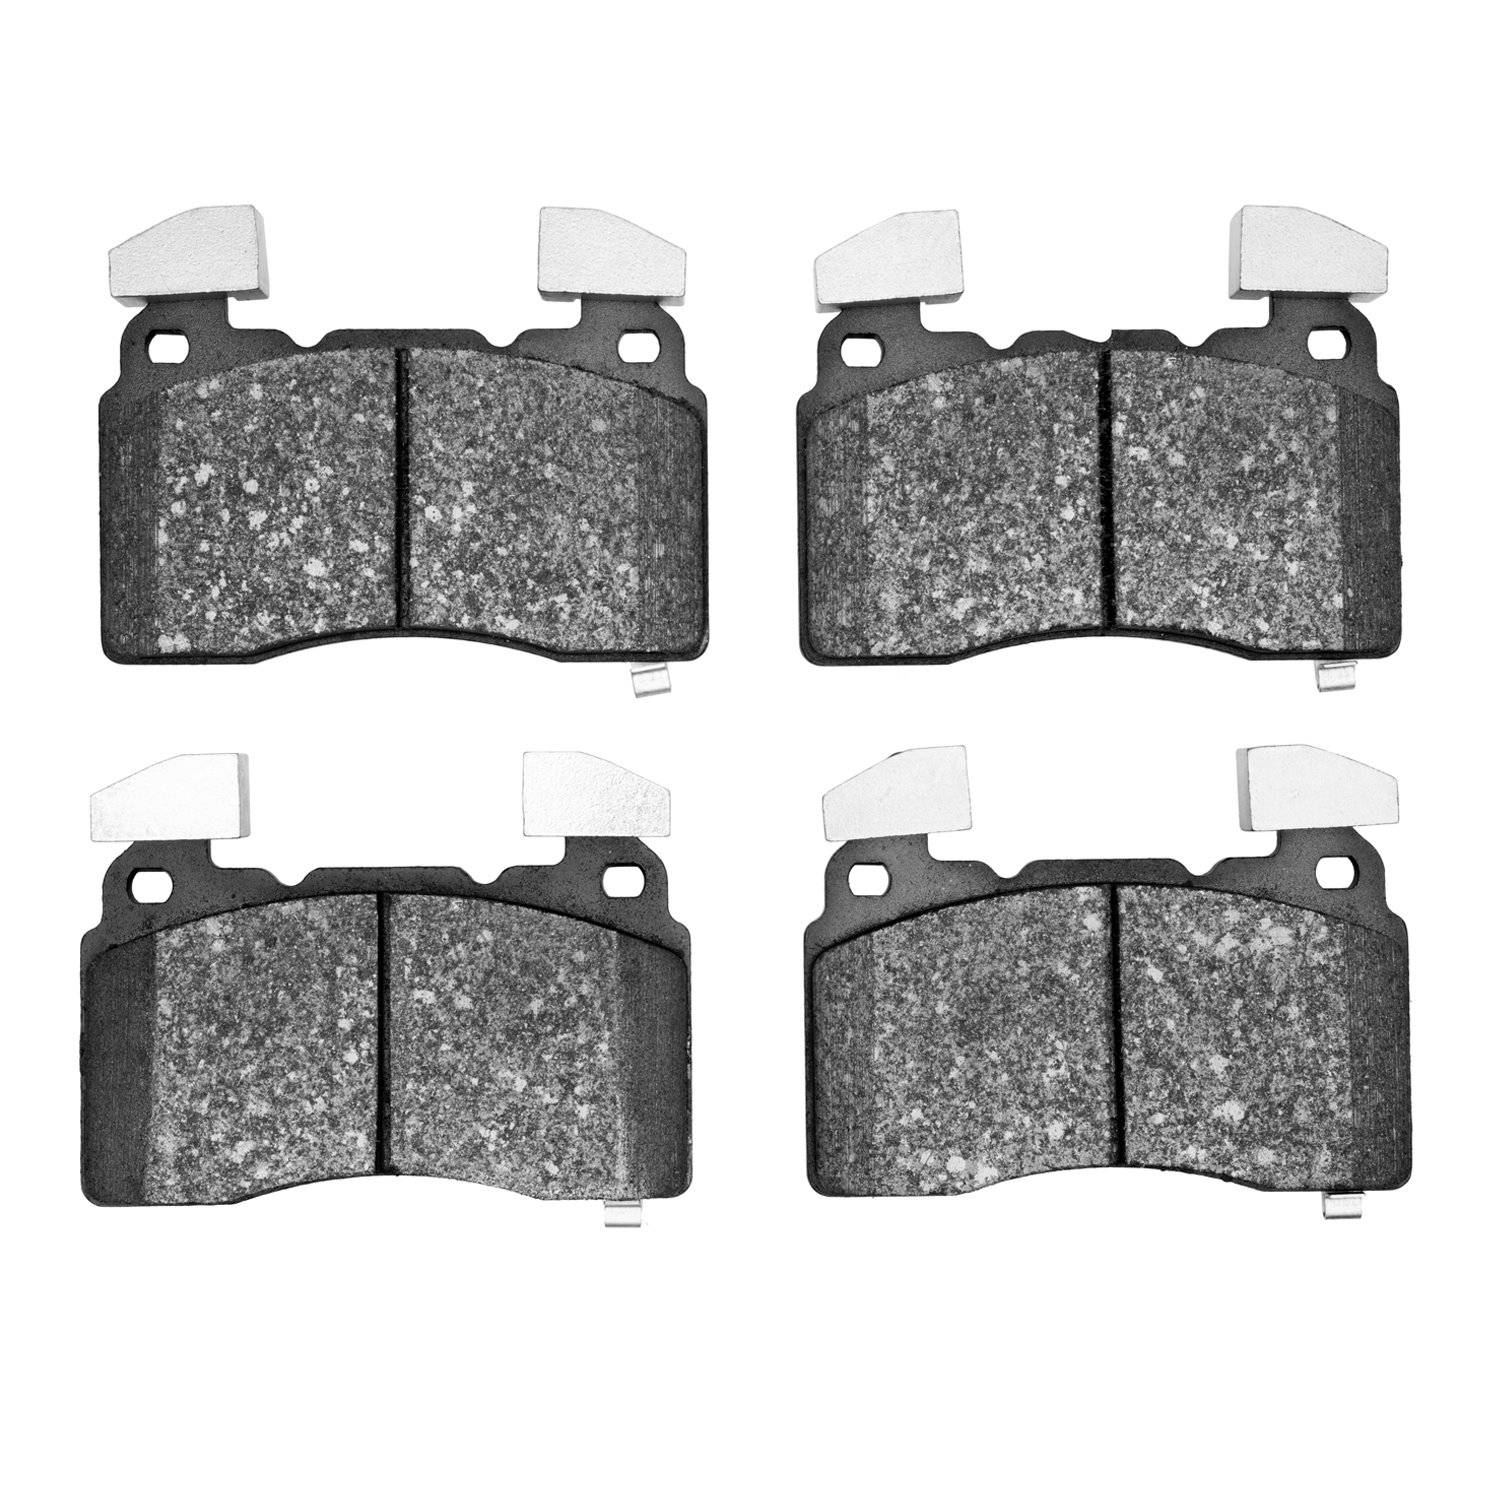 1000-1474-10 Track/Street Low-Metallic Brake Pads Kit, Fits Select Multiple Makes/Models, Position: Front